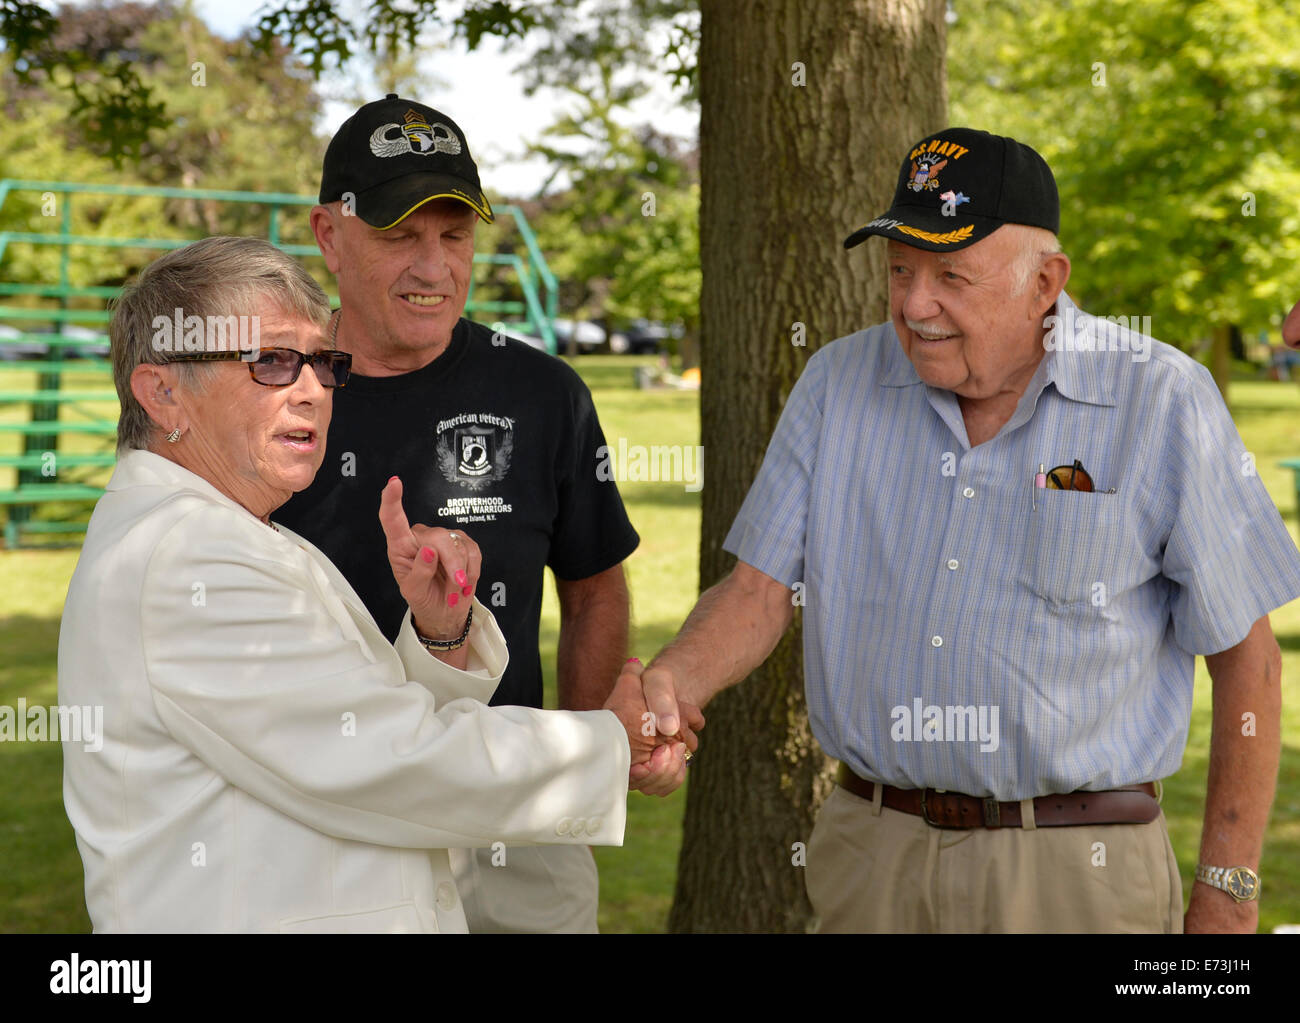 East Meadow, New York, USA. 3rd September, 2014. Representative CAROLYN MCCARTHY (NY-04) speaks with PAT YNGSTROM (in black shirt) of Merrick, U.S. Army Paratrooper, Vietnam War Veteran, and PAUL ZYDOR, (in blue shirt) of Merrick, U.S. Navy, Korean War Veteran, before press conference when congressional candidate K. Rice releases a whitepaper on veterans policy and announces formation of her campaign's Veterans Advisory Committee, at Veterans Memorial at Eisenhower Park, after Rice and outgoing Congresswoman toured Northport VA Medical Center. Credit:  Ann E Parry/Alamy Live News Stock Photo